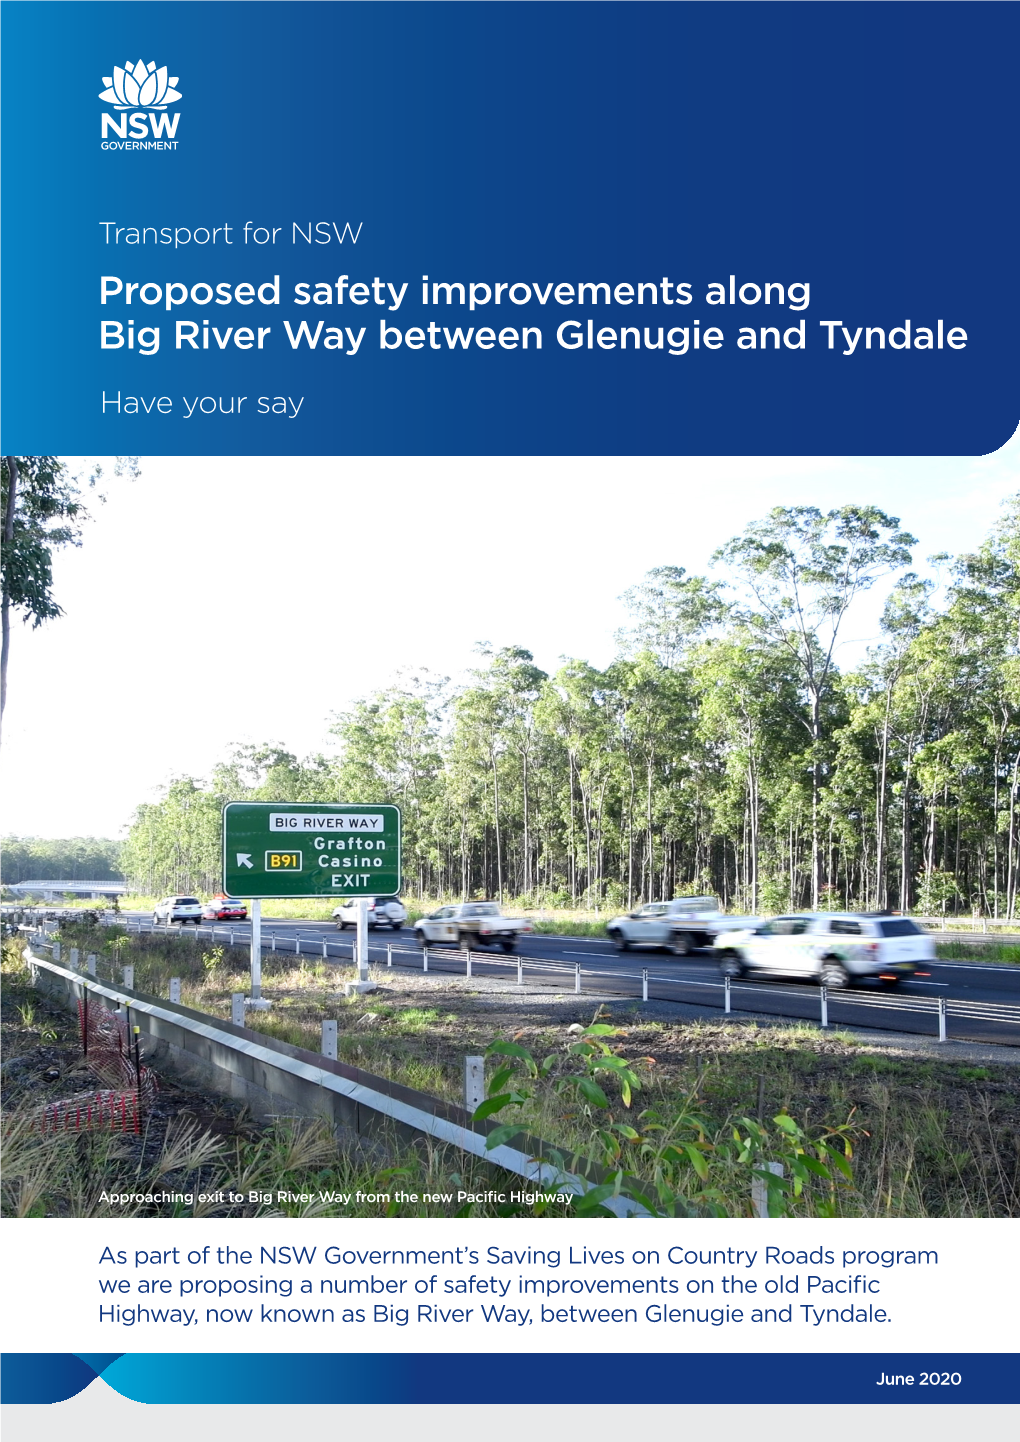 Safety Upgrade of Big River Way Between Glenugie and Tyndale